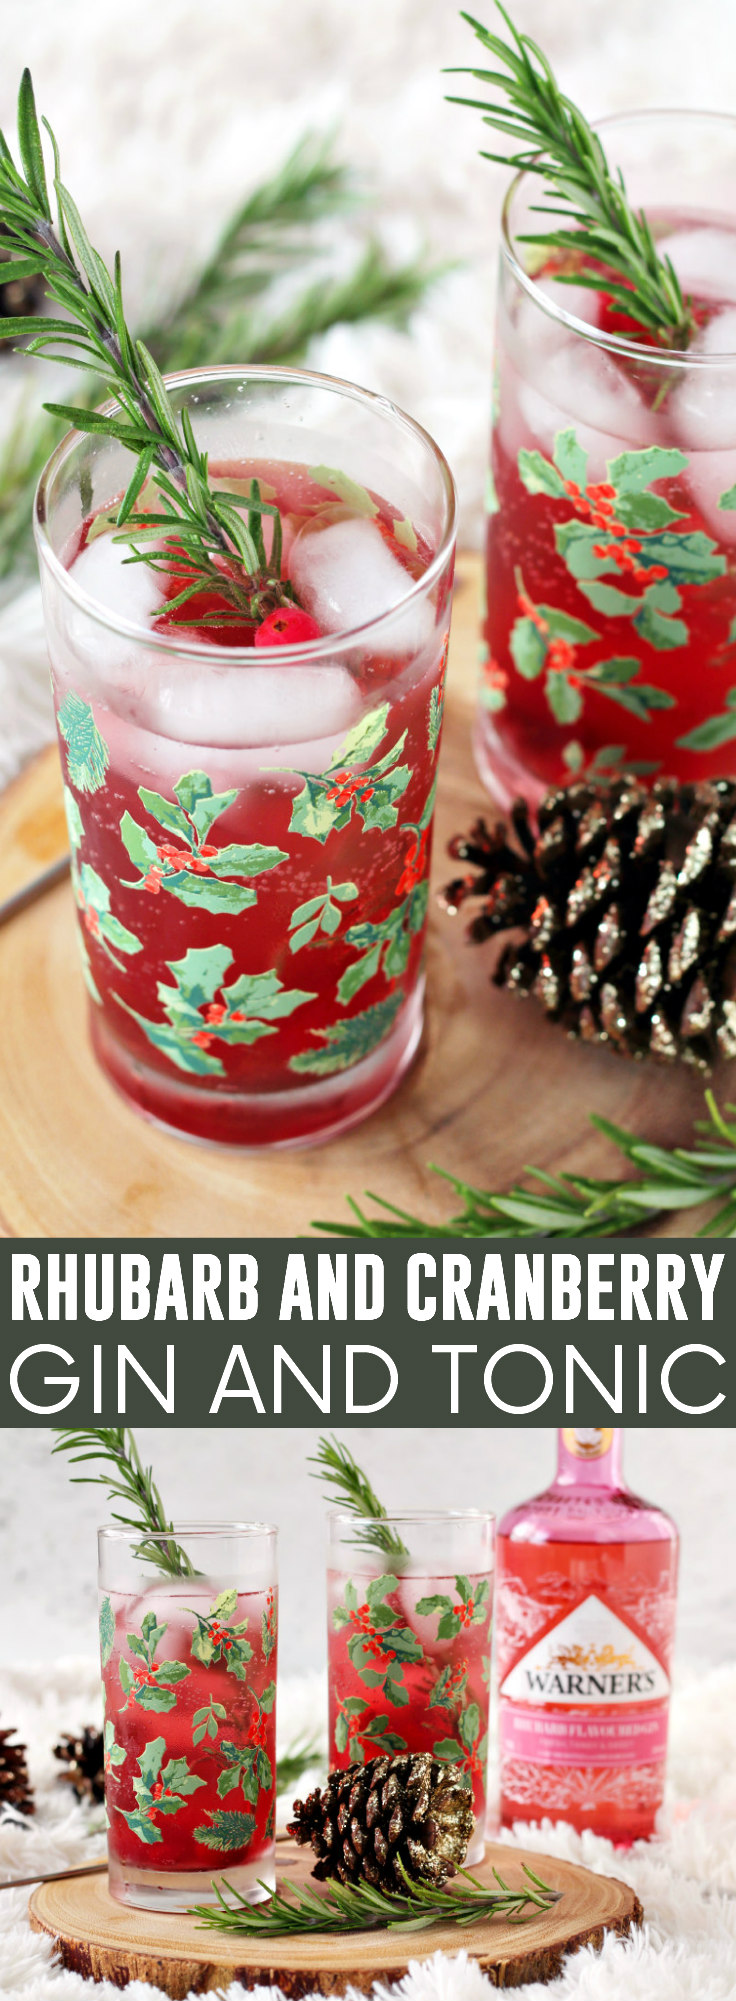 Rhubarb and Cranberry Gin and Tonic pinnable image.